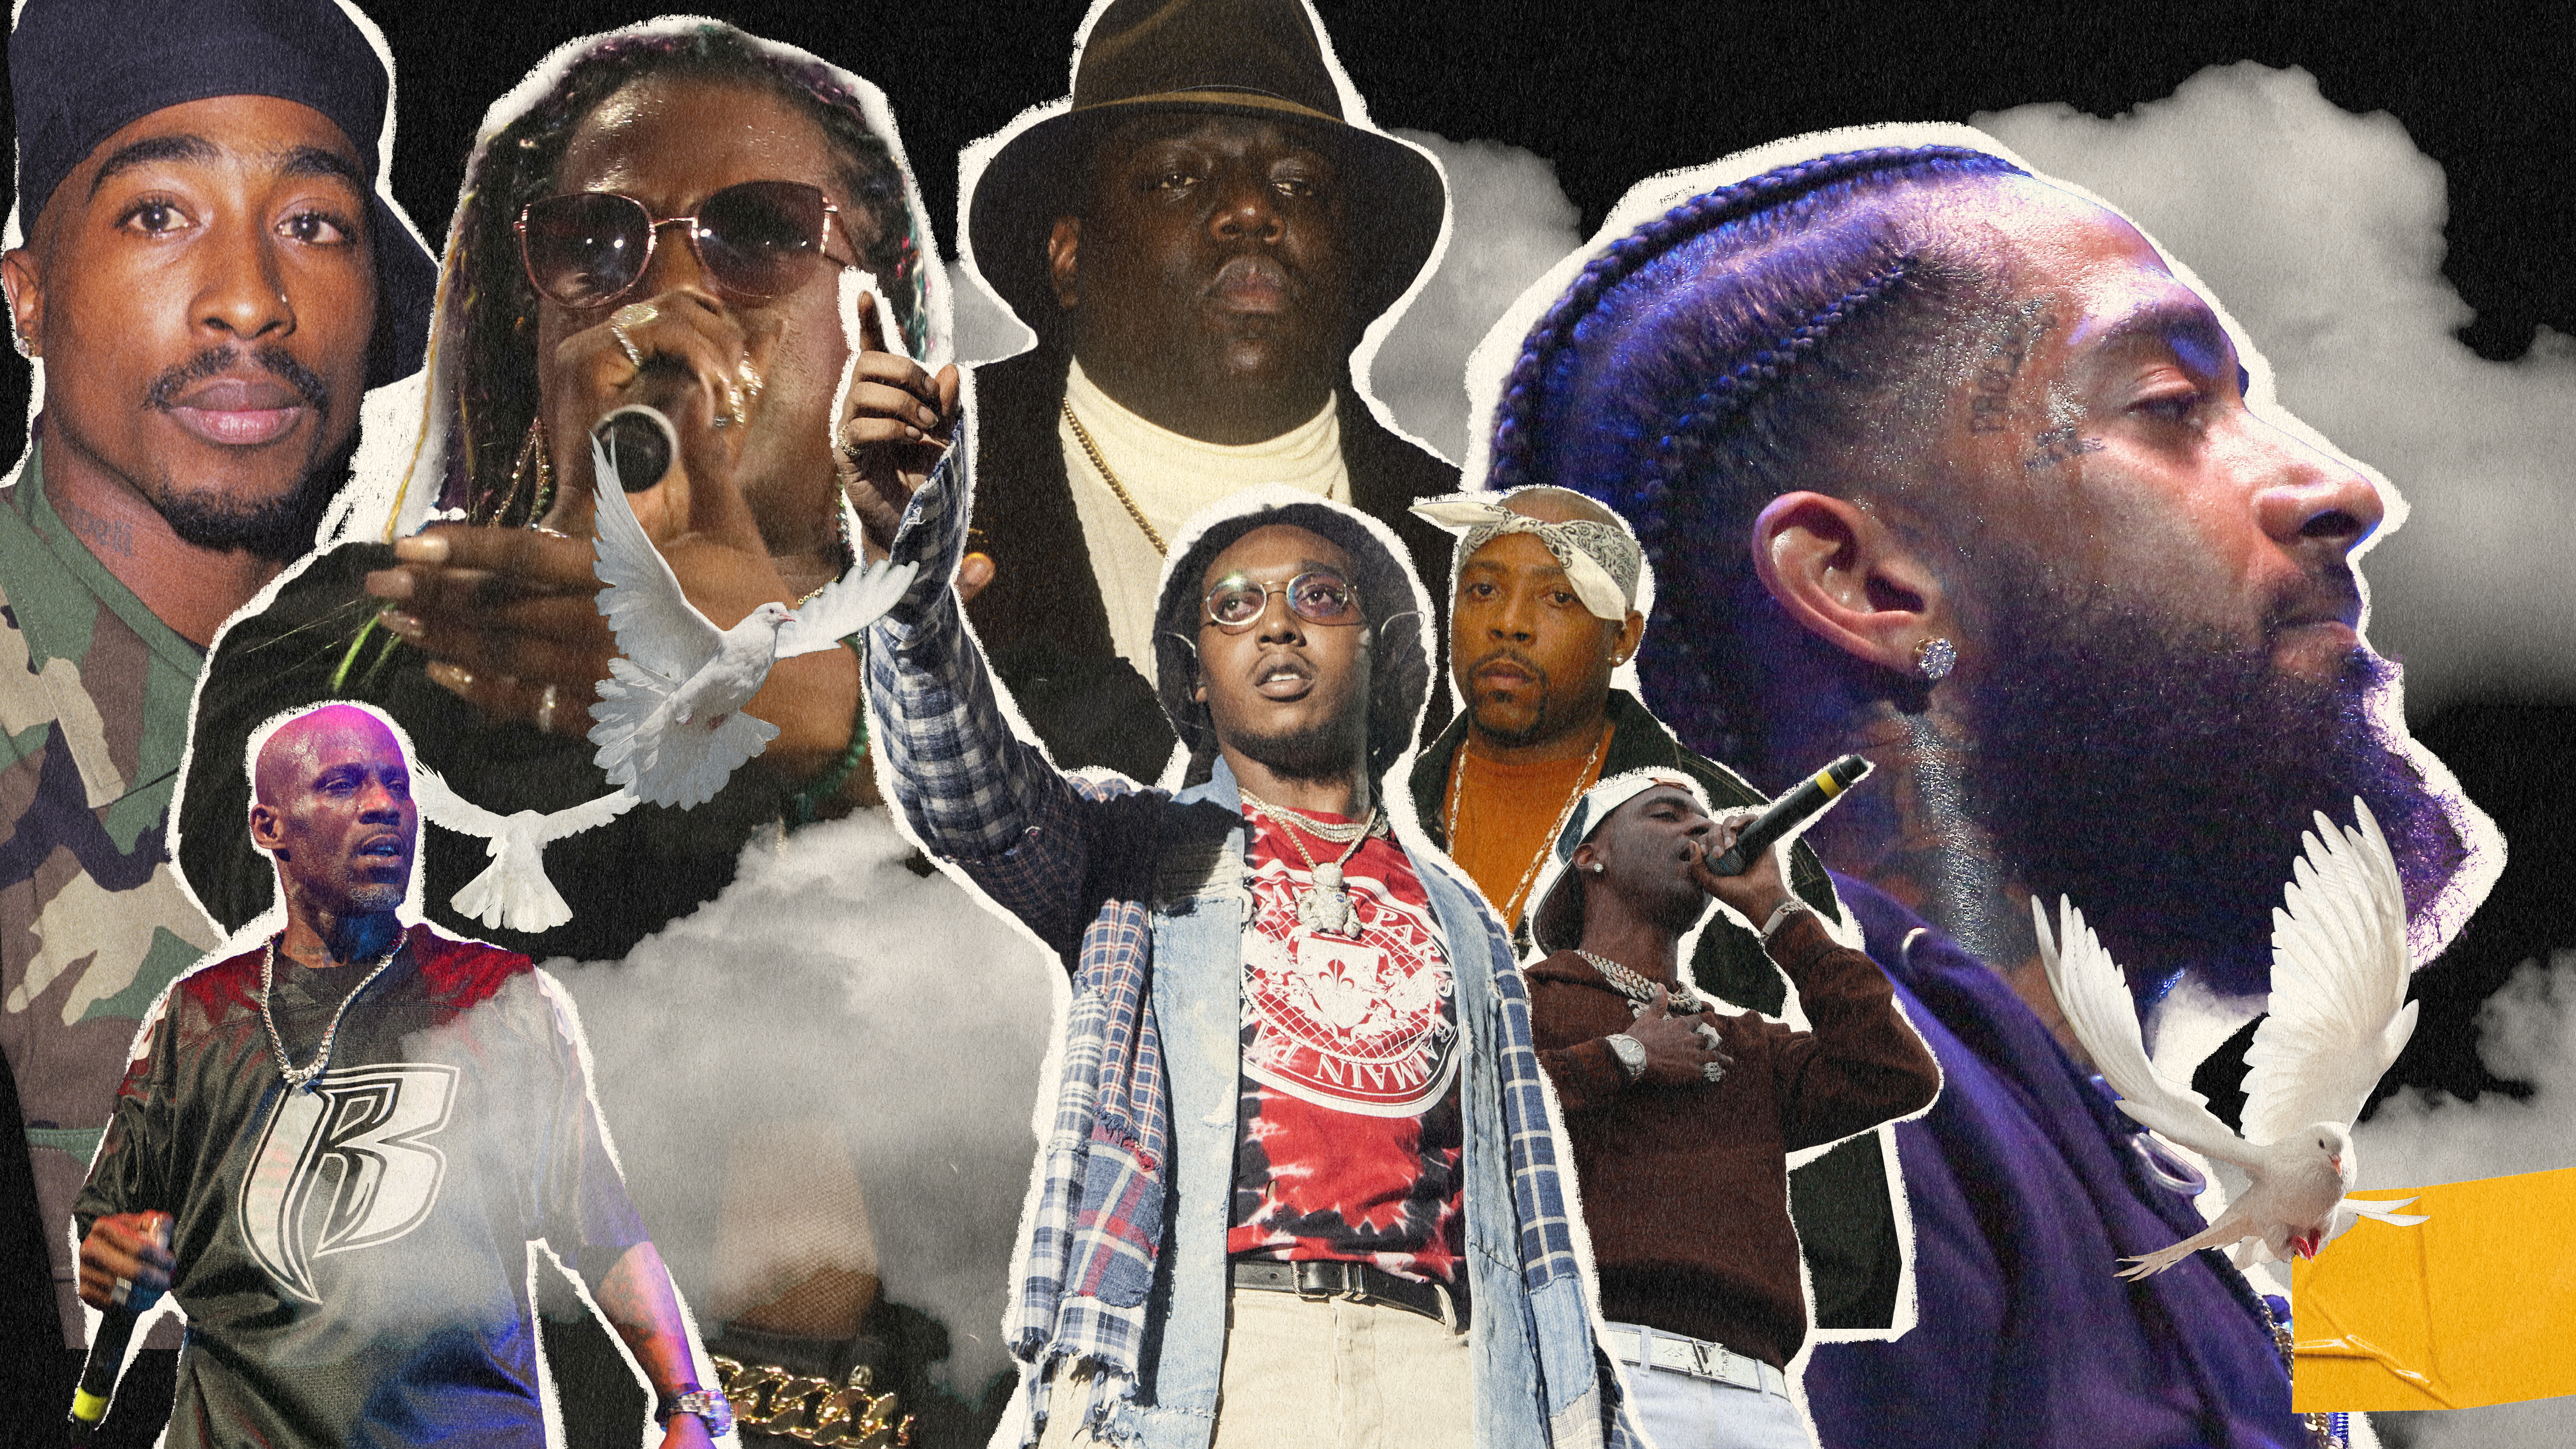 Fallen Rappers And The Unsettling Truth About America | HuffPost